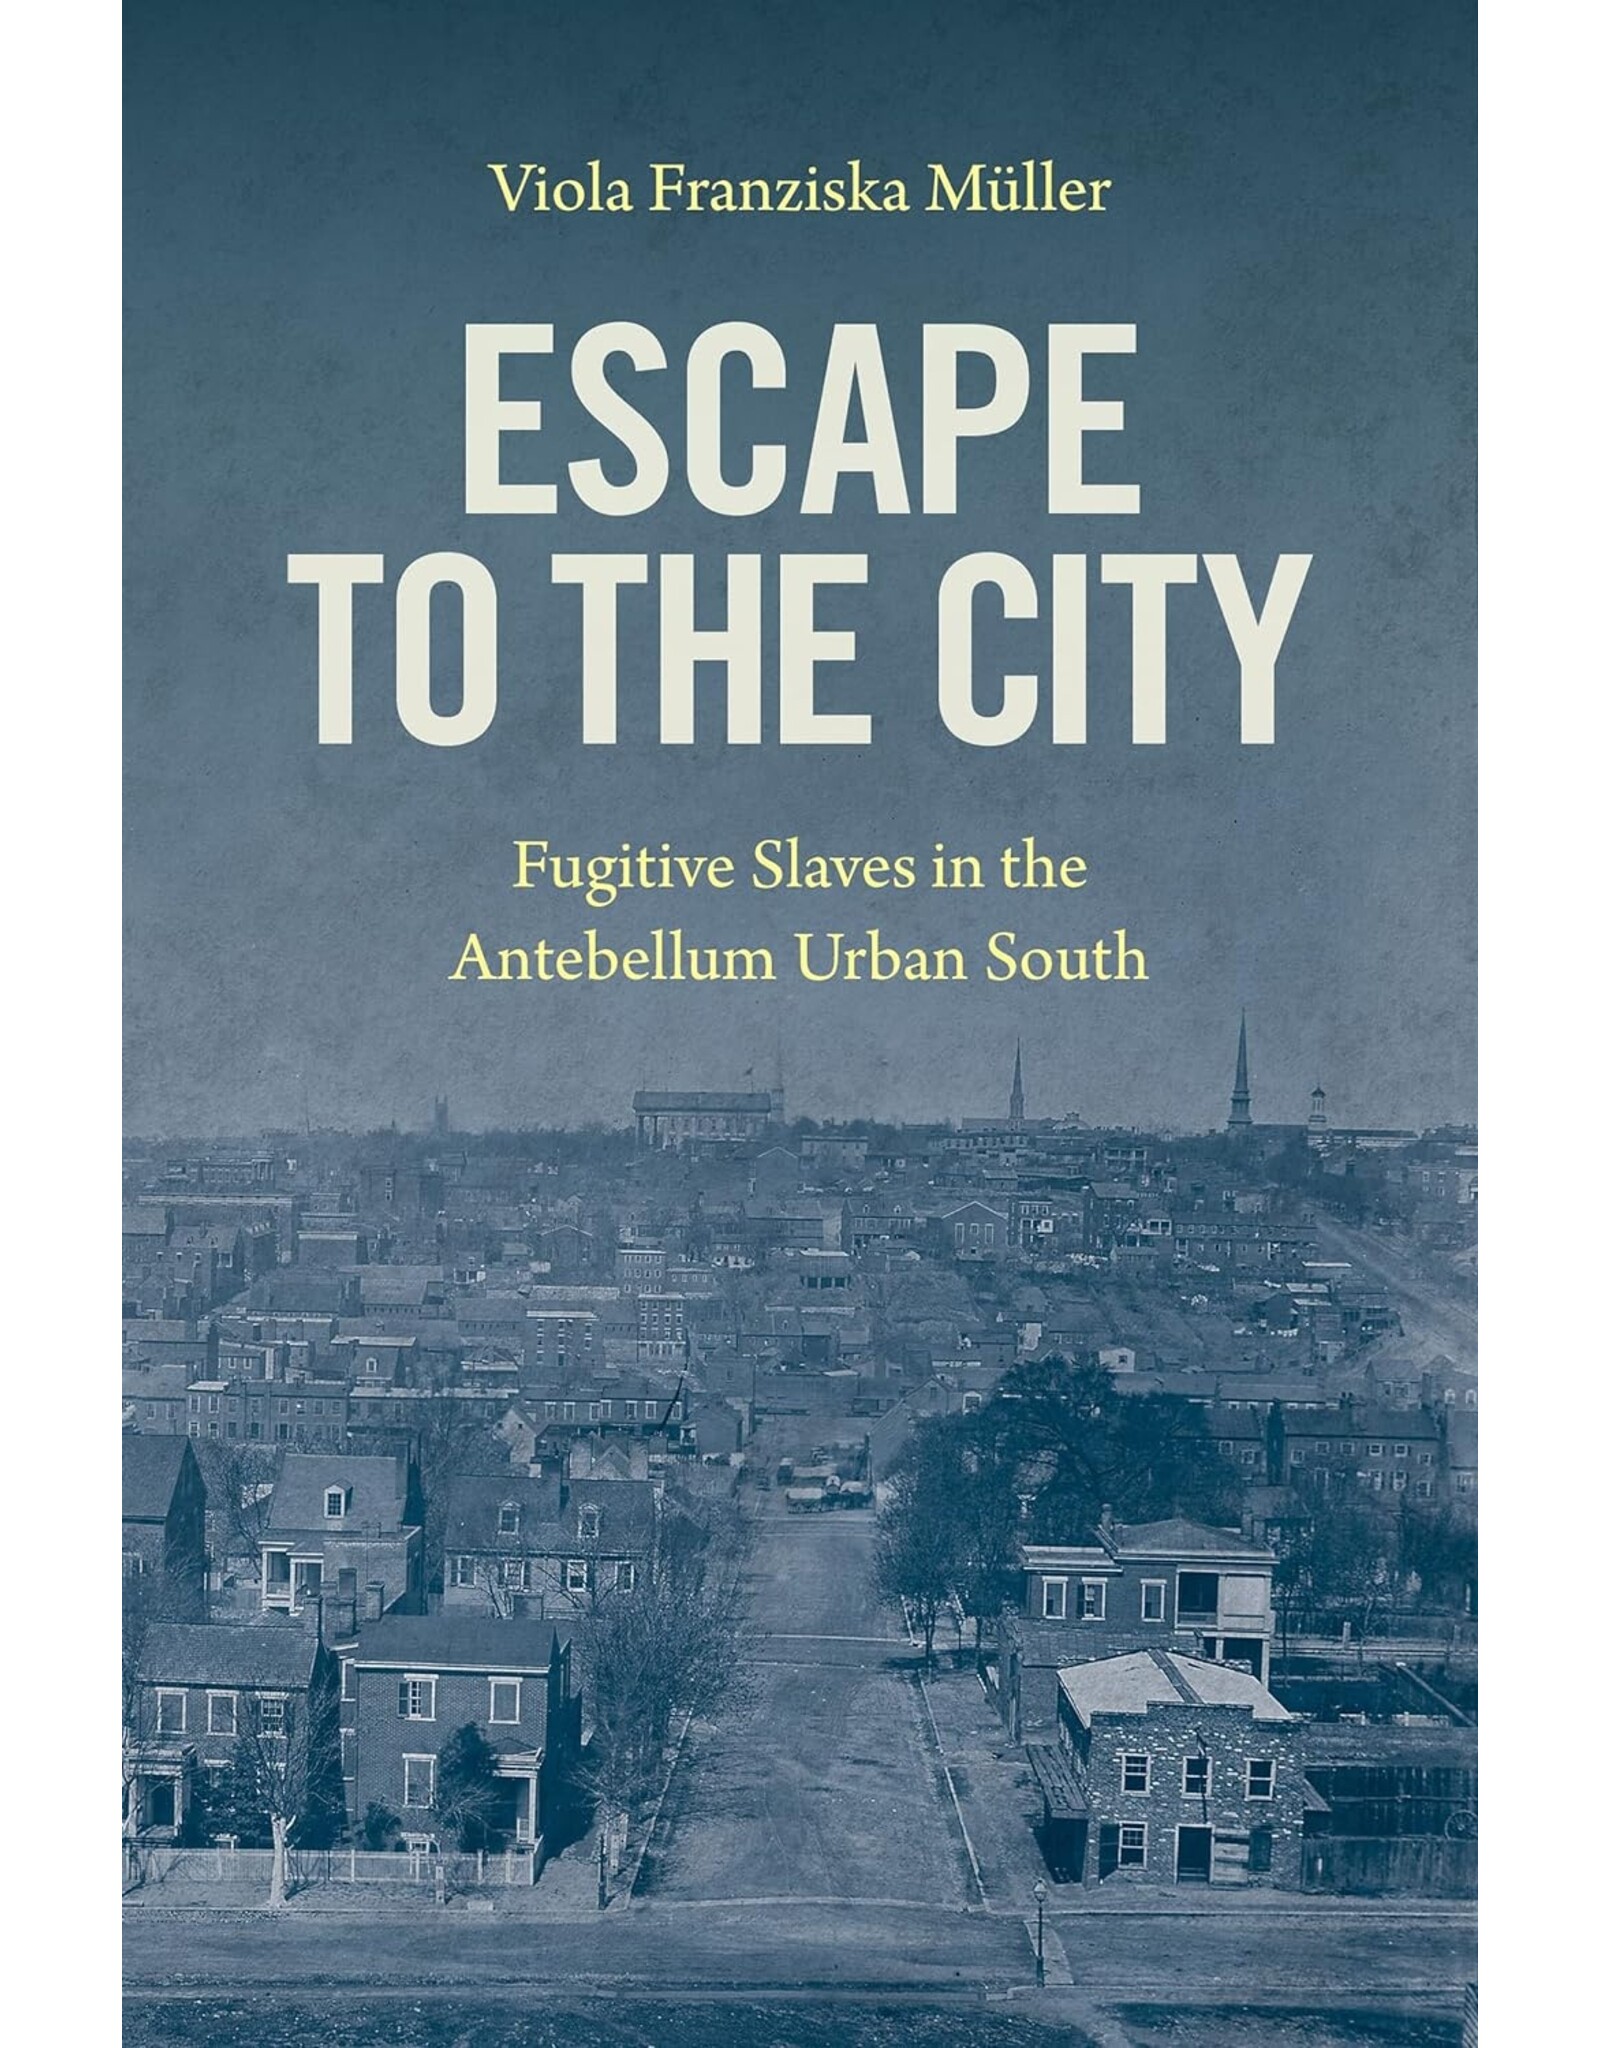 Escape To The City: Fugitive Slaves in the Antebellum Urban South